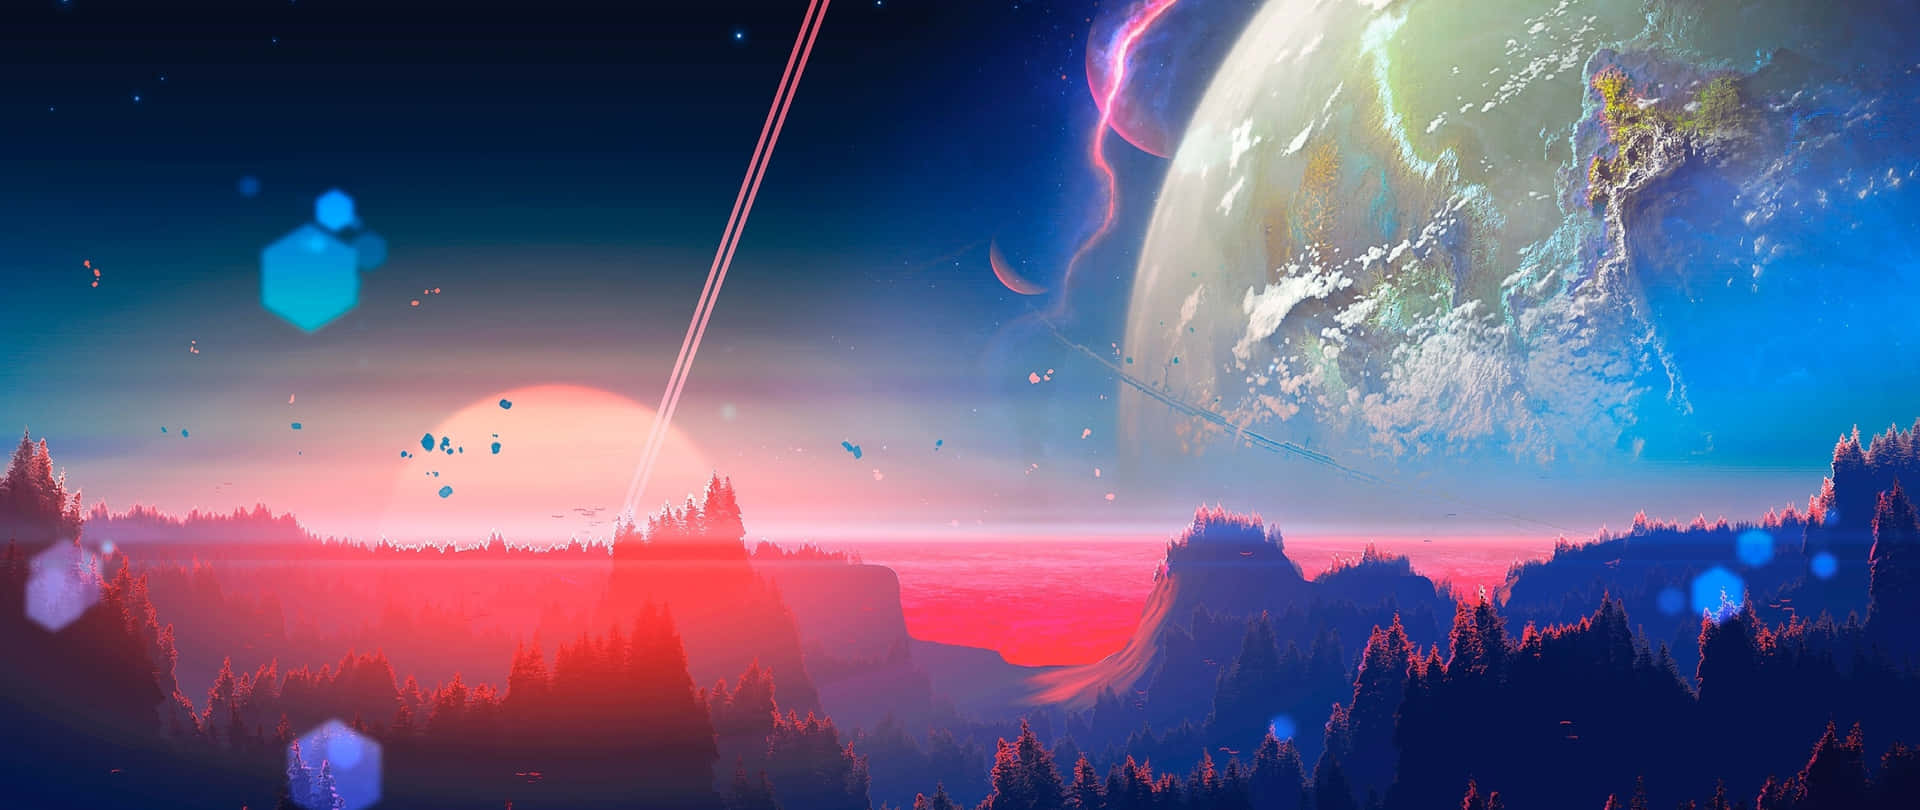 Outer Space Aesthetic Art 2560x1080 Wallpaper